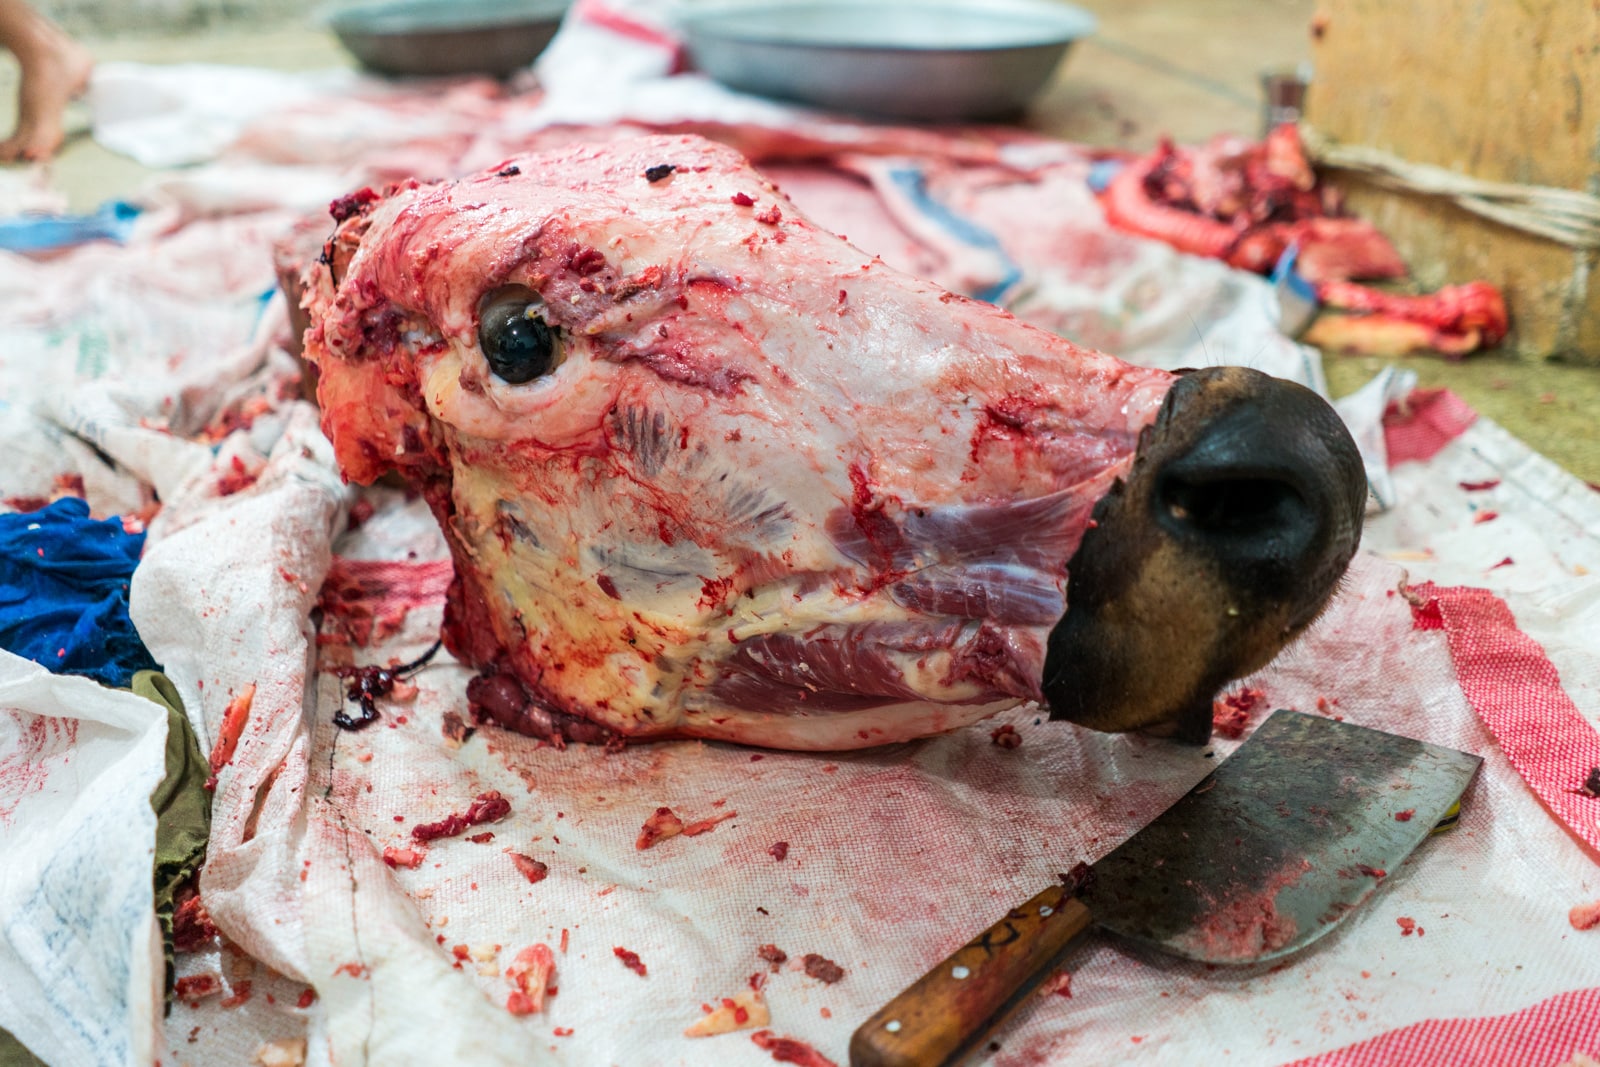 Celebrating Eid al-Adha in Lahore, Pakistan - A severed, skinned cow head on the ground with butcher's knife - Lost With Purpose travel blog